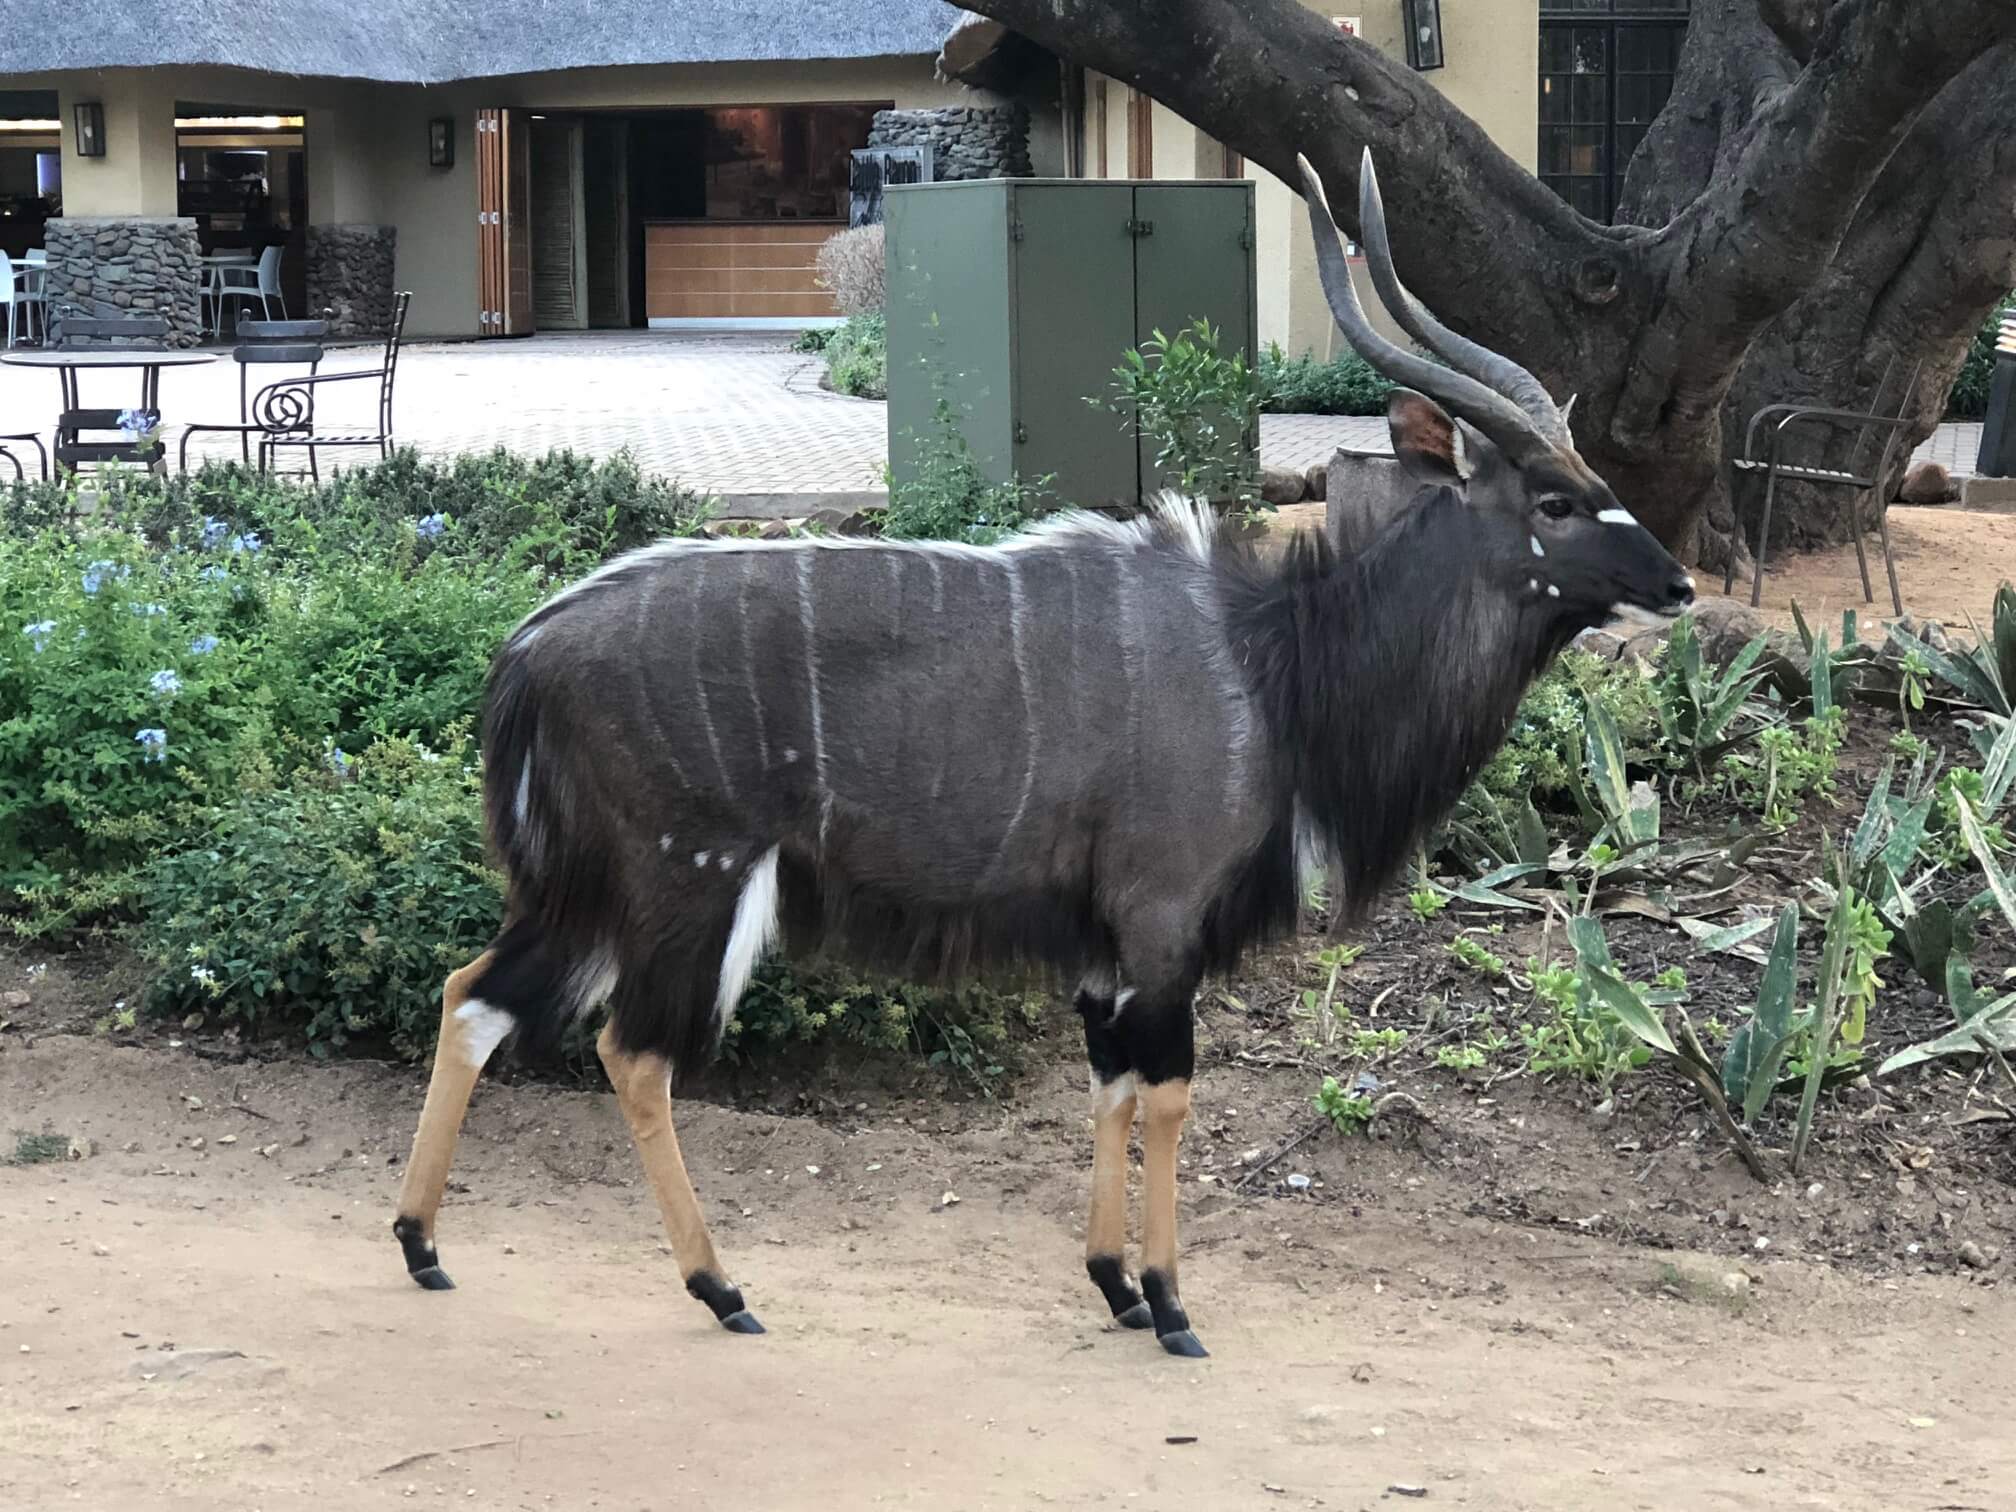 A nyala that passed through the fence at Skukuza Rest Camp in Kruger National Park, South Africa.